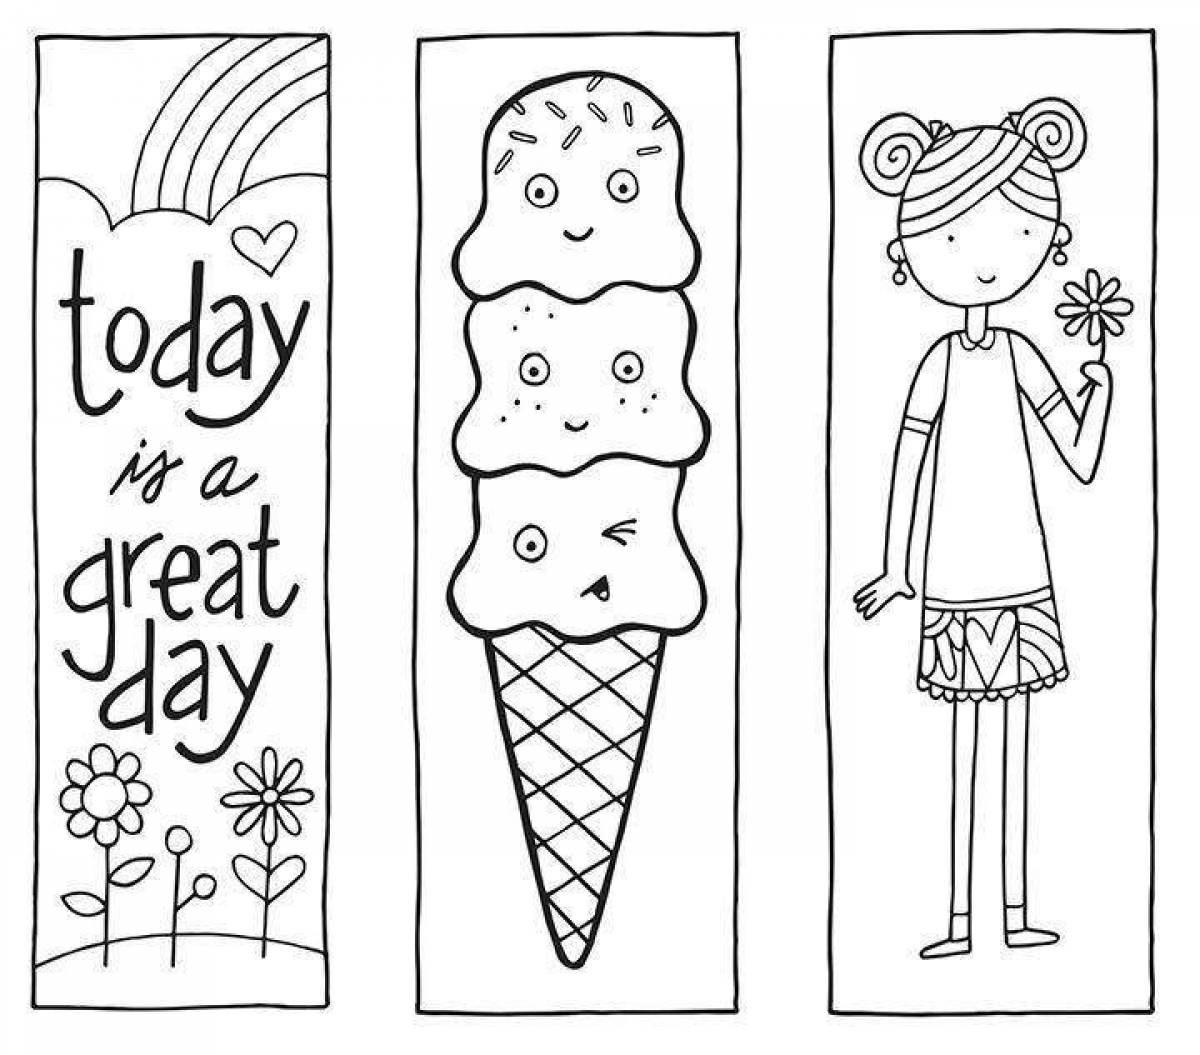 Personal diary coloring page